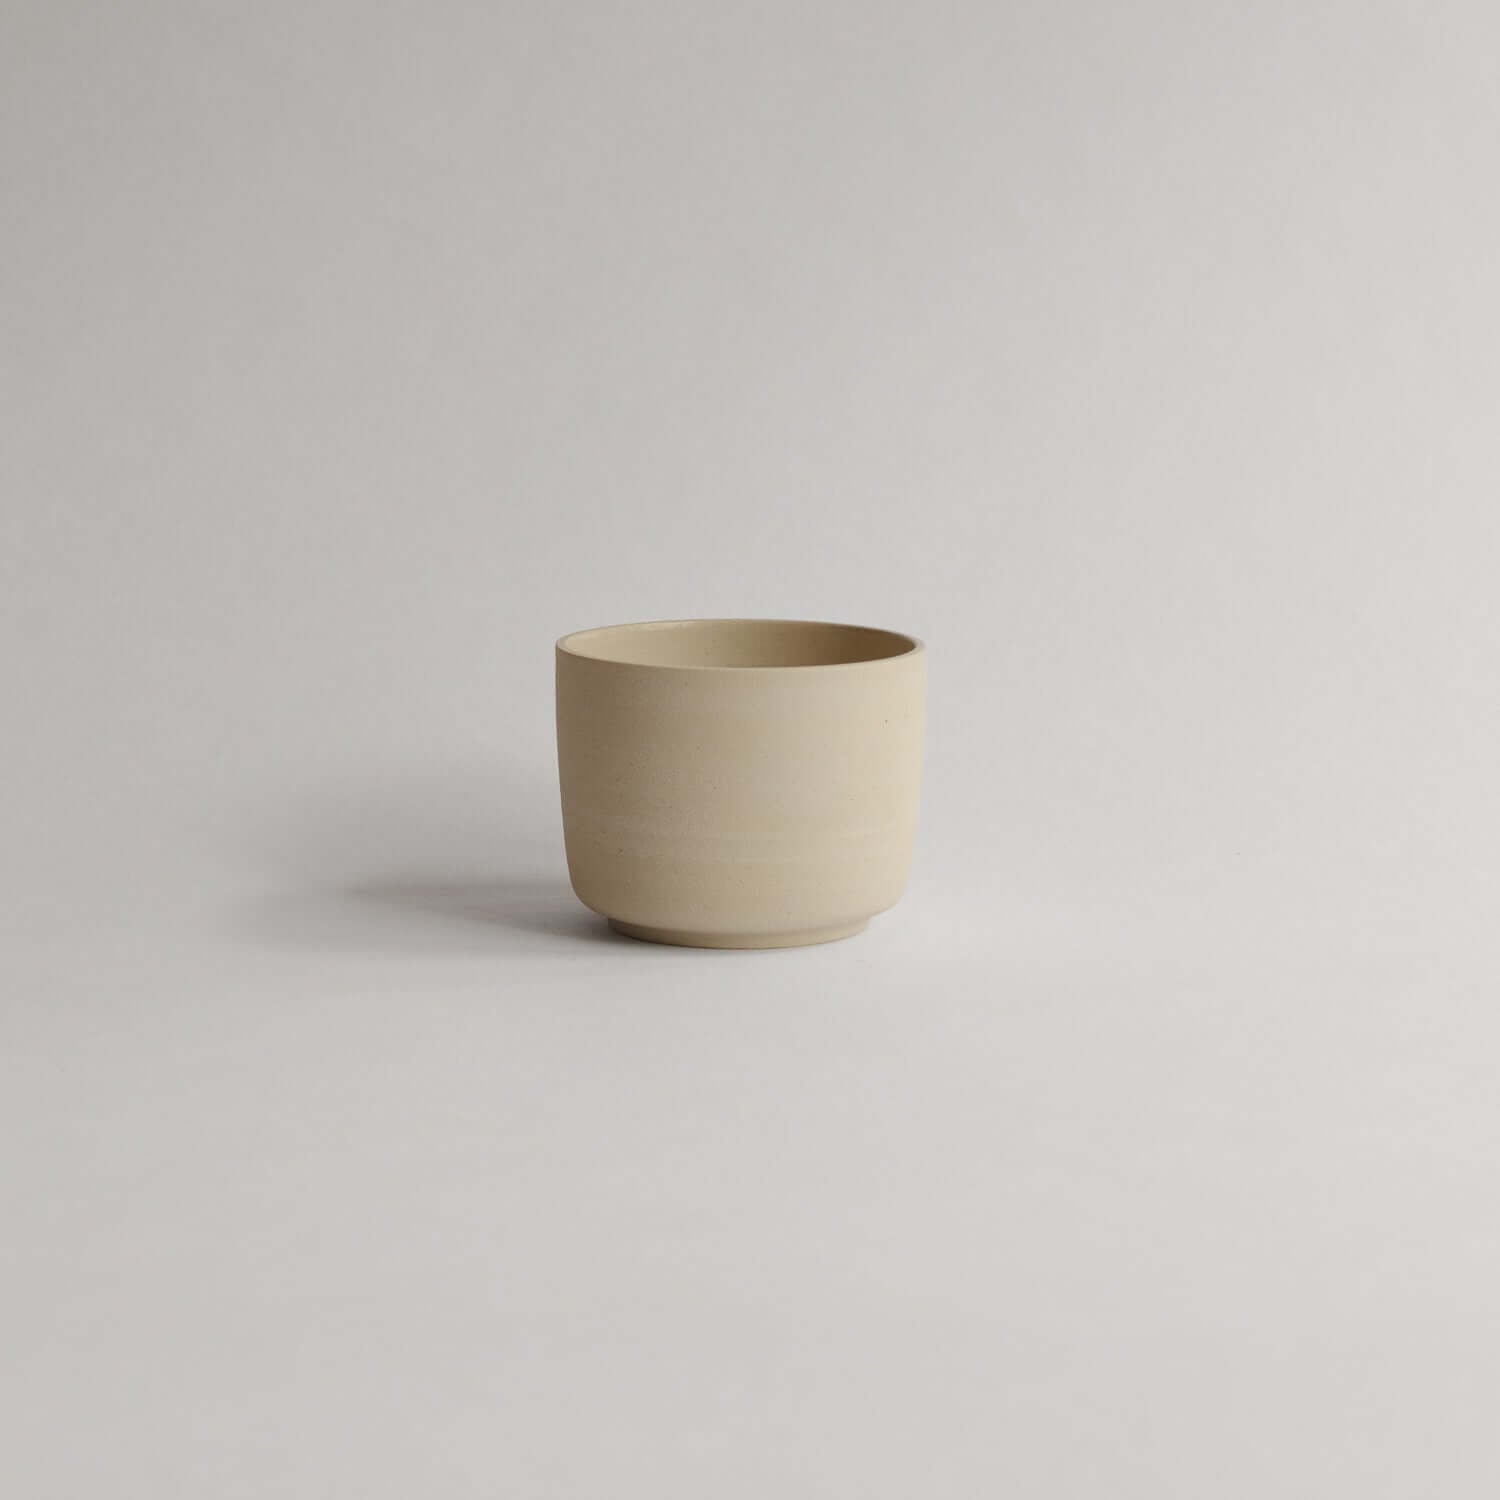 Unique handcrafted Nomi Creme Coffee Cup. 170ml capacity, durable grey stoneware with glossy interior. Perfect for your classic coffee moments. von viola beuscher ceramics